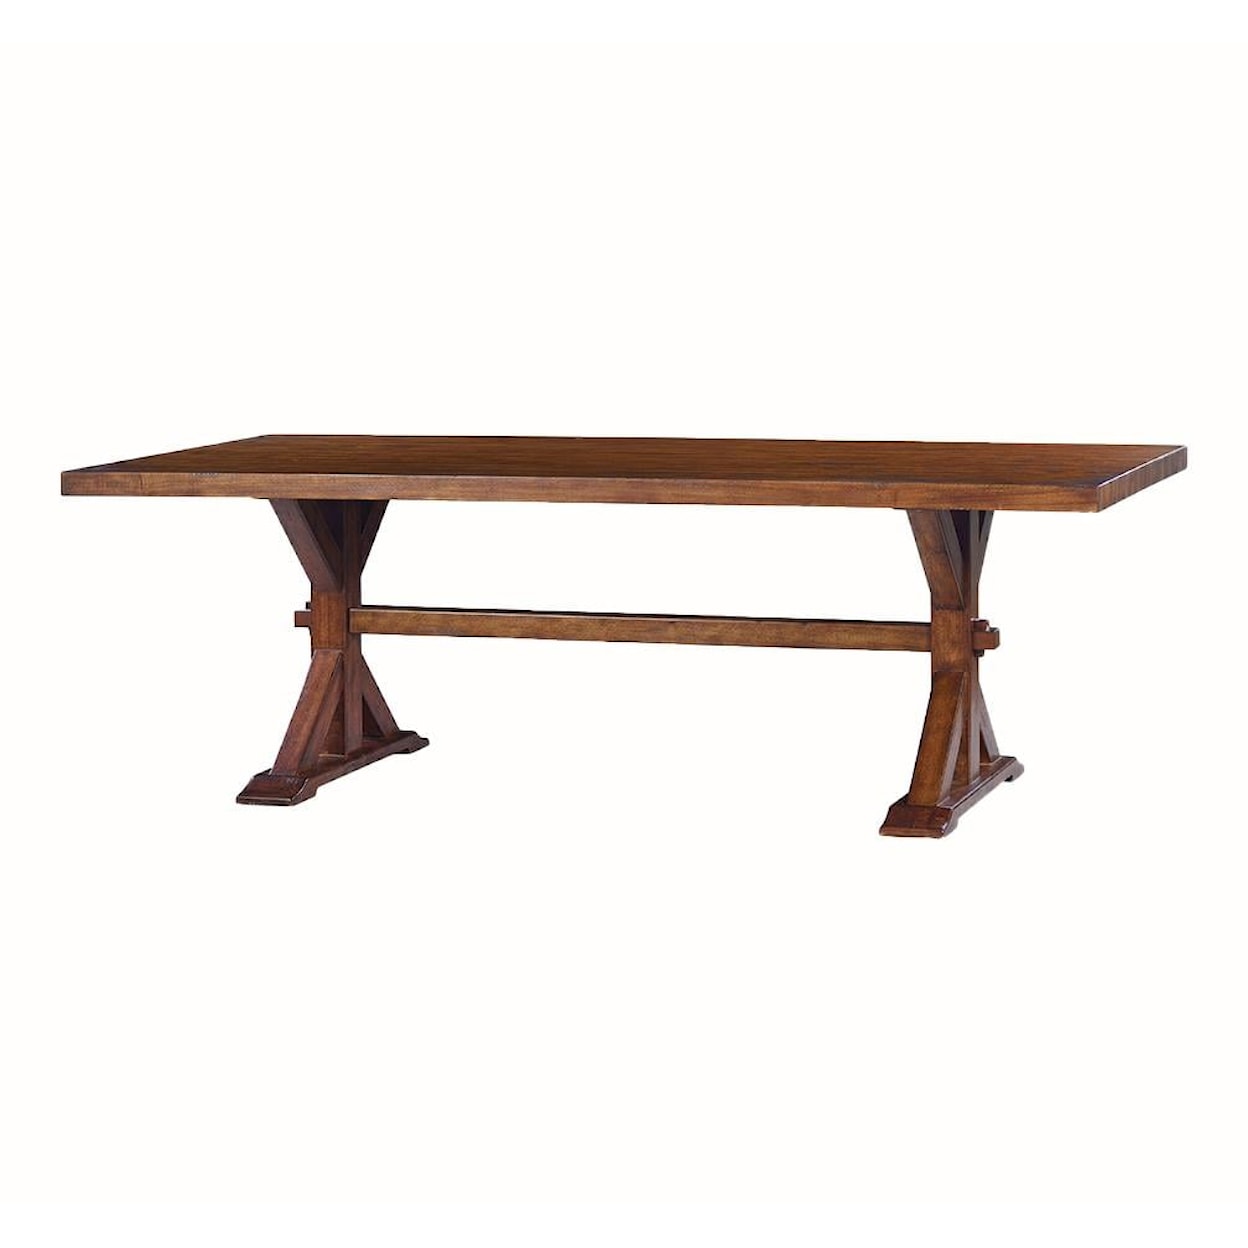 Oliver Home Furnishings Dining Tables RECTANGLE DINING TABLE- COUNTRY